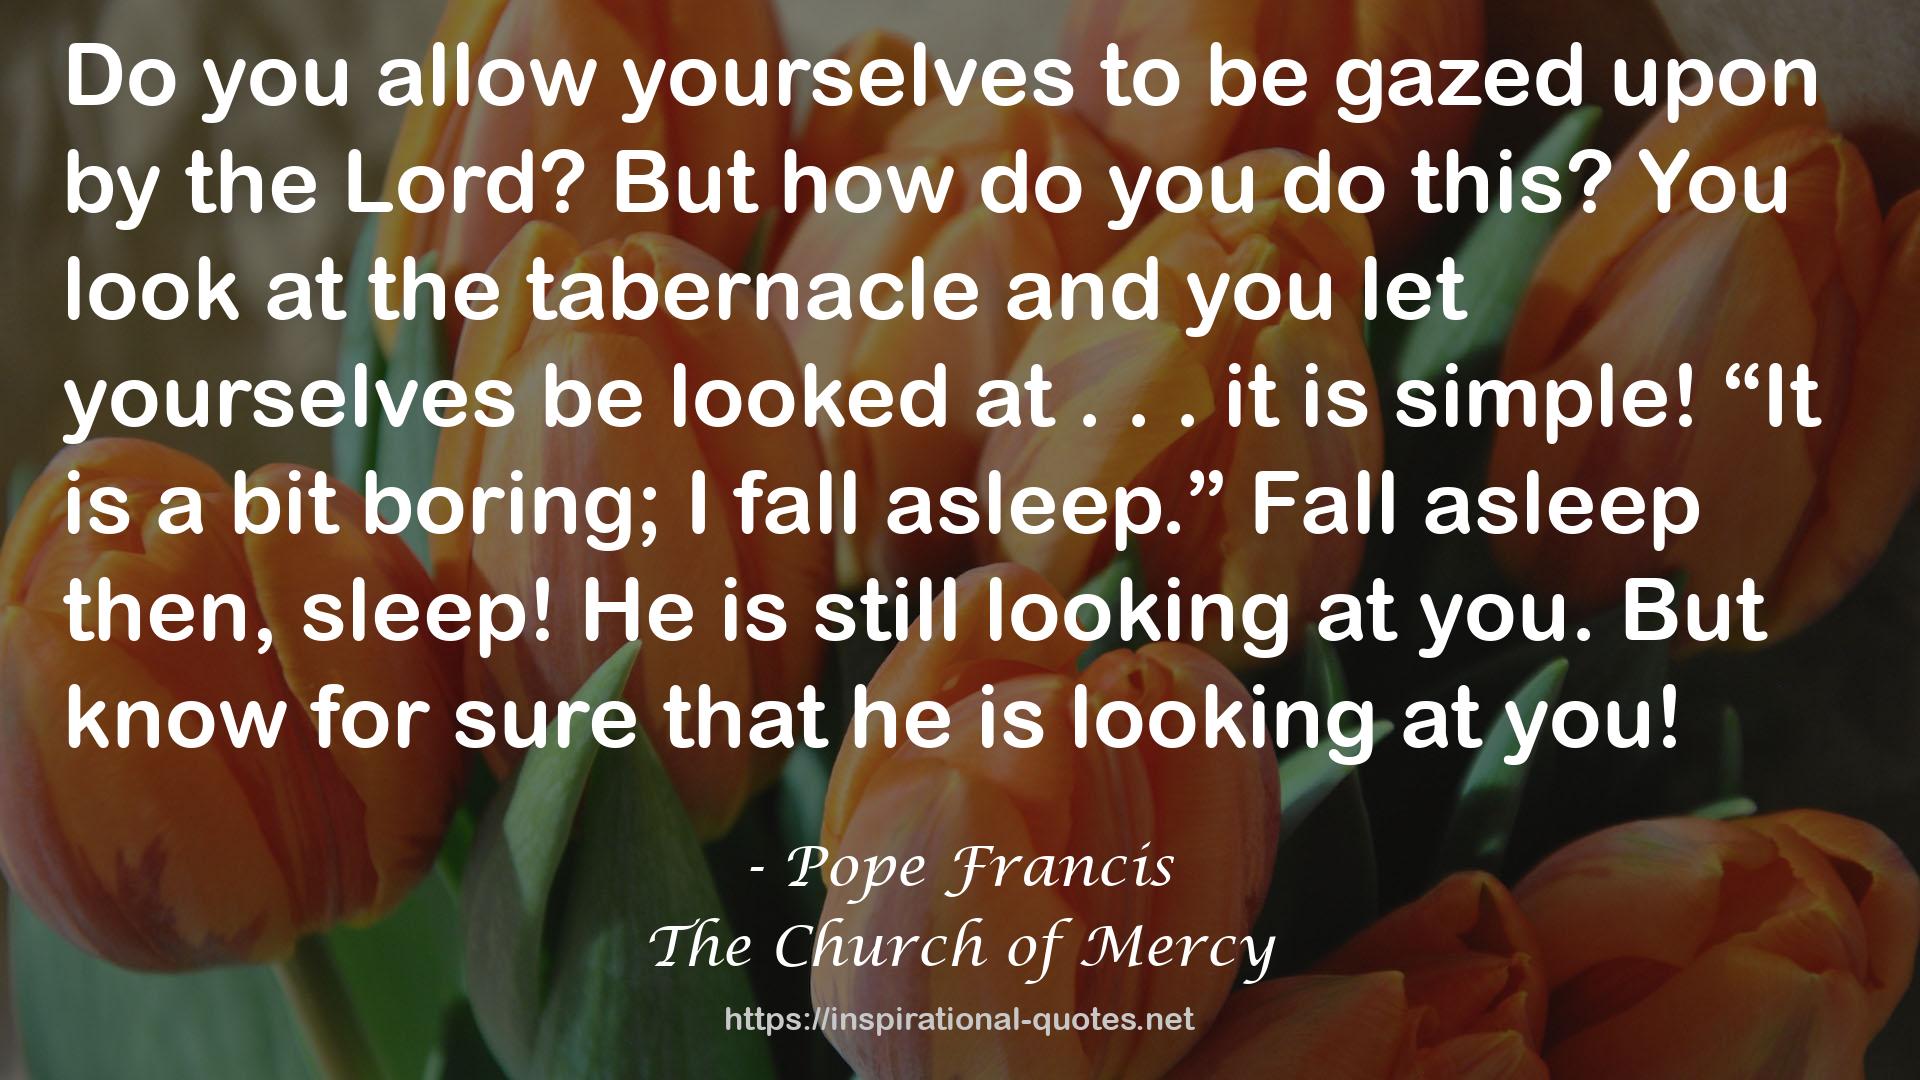 The Church of Mercy QUOTES